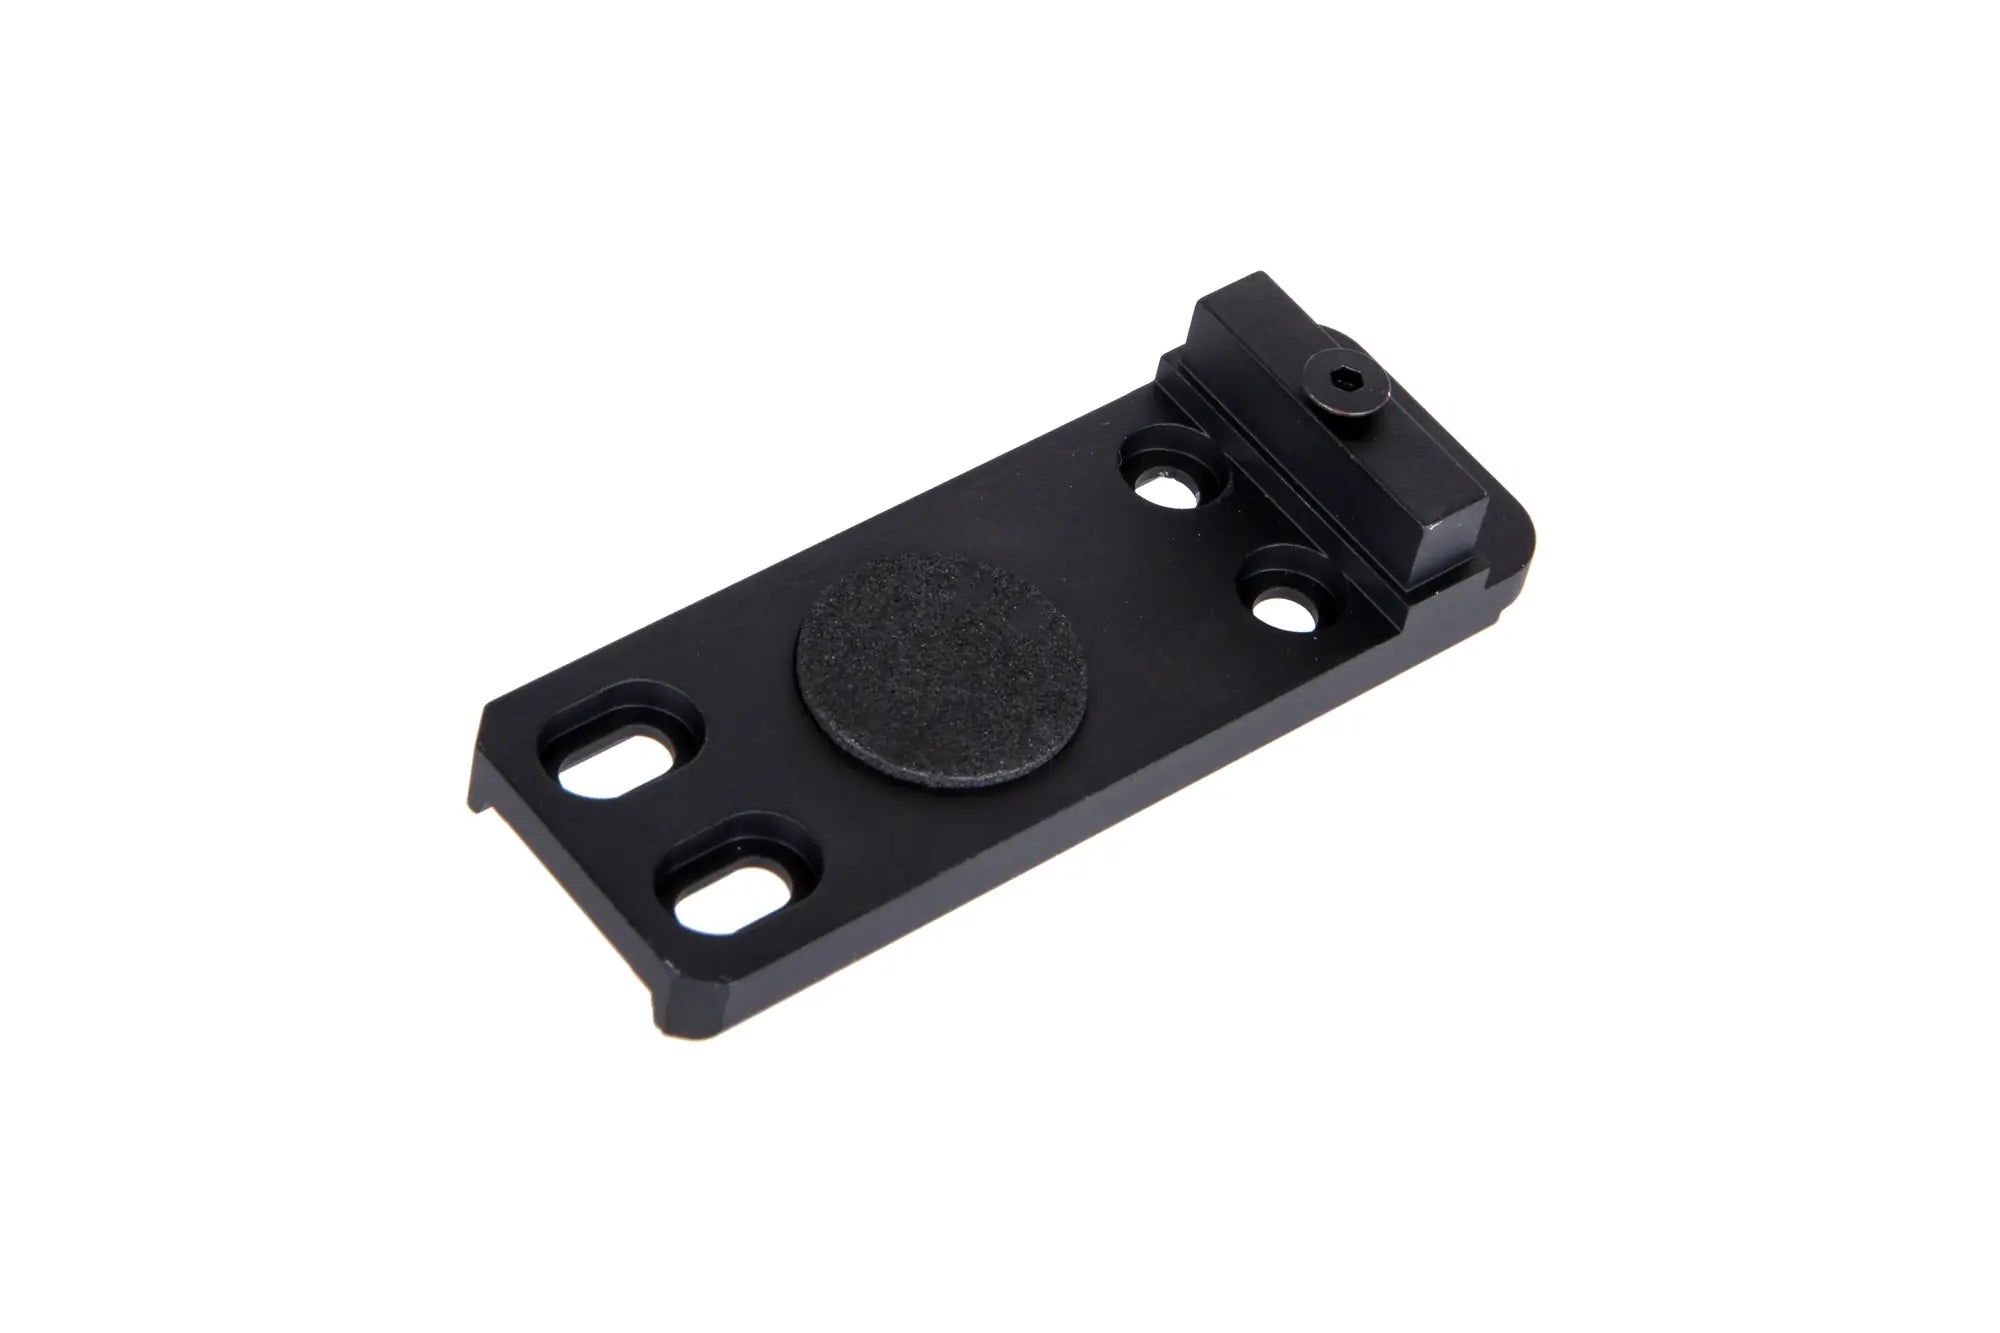 Mini Collimator Mount for G17 TM Replicas Black made from durable aluminum.